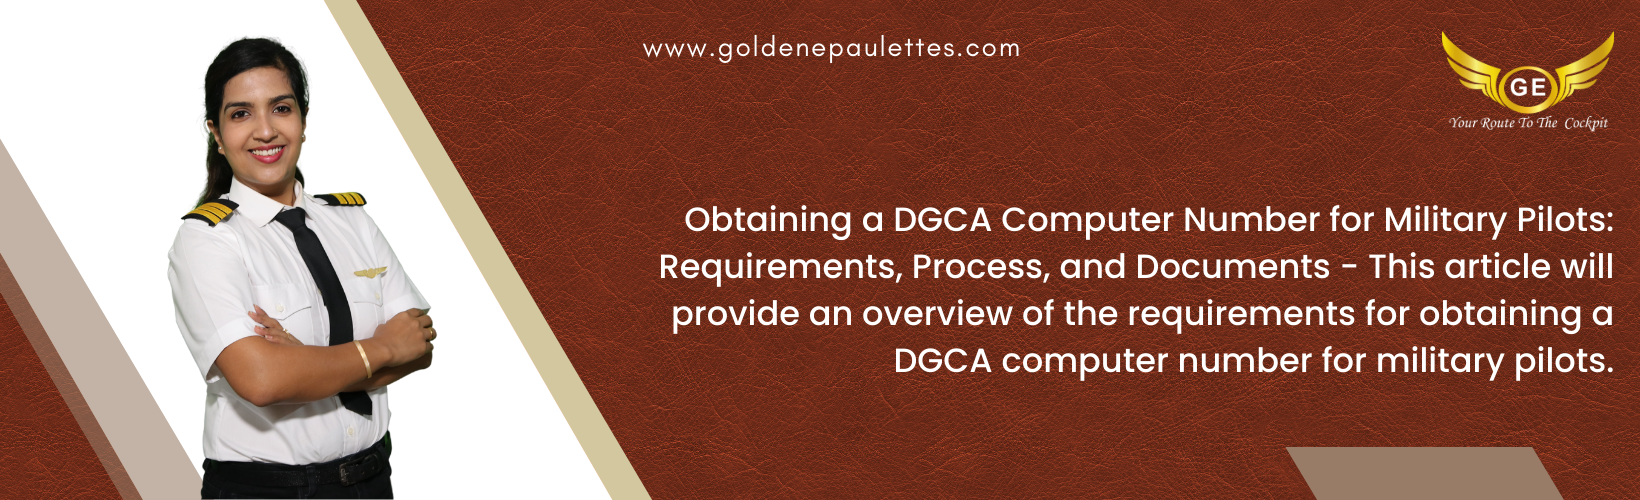 An Overview of the Requirements for Obtaining a DGCA Computer Number for Military Pilots